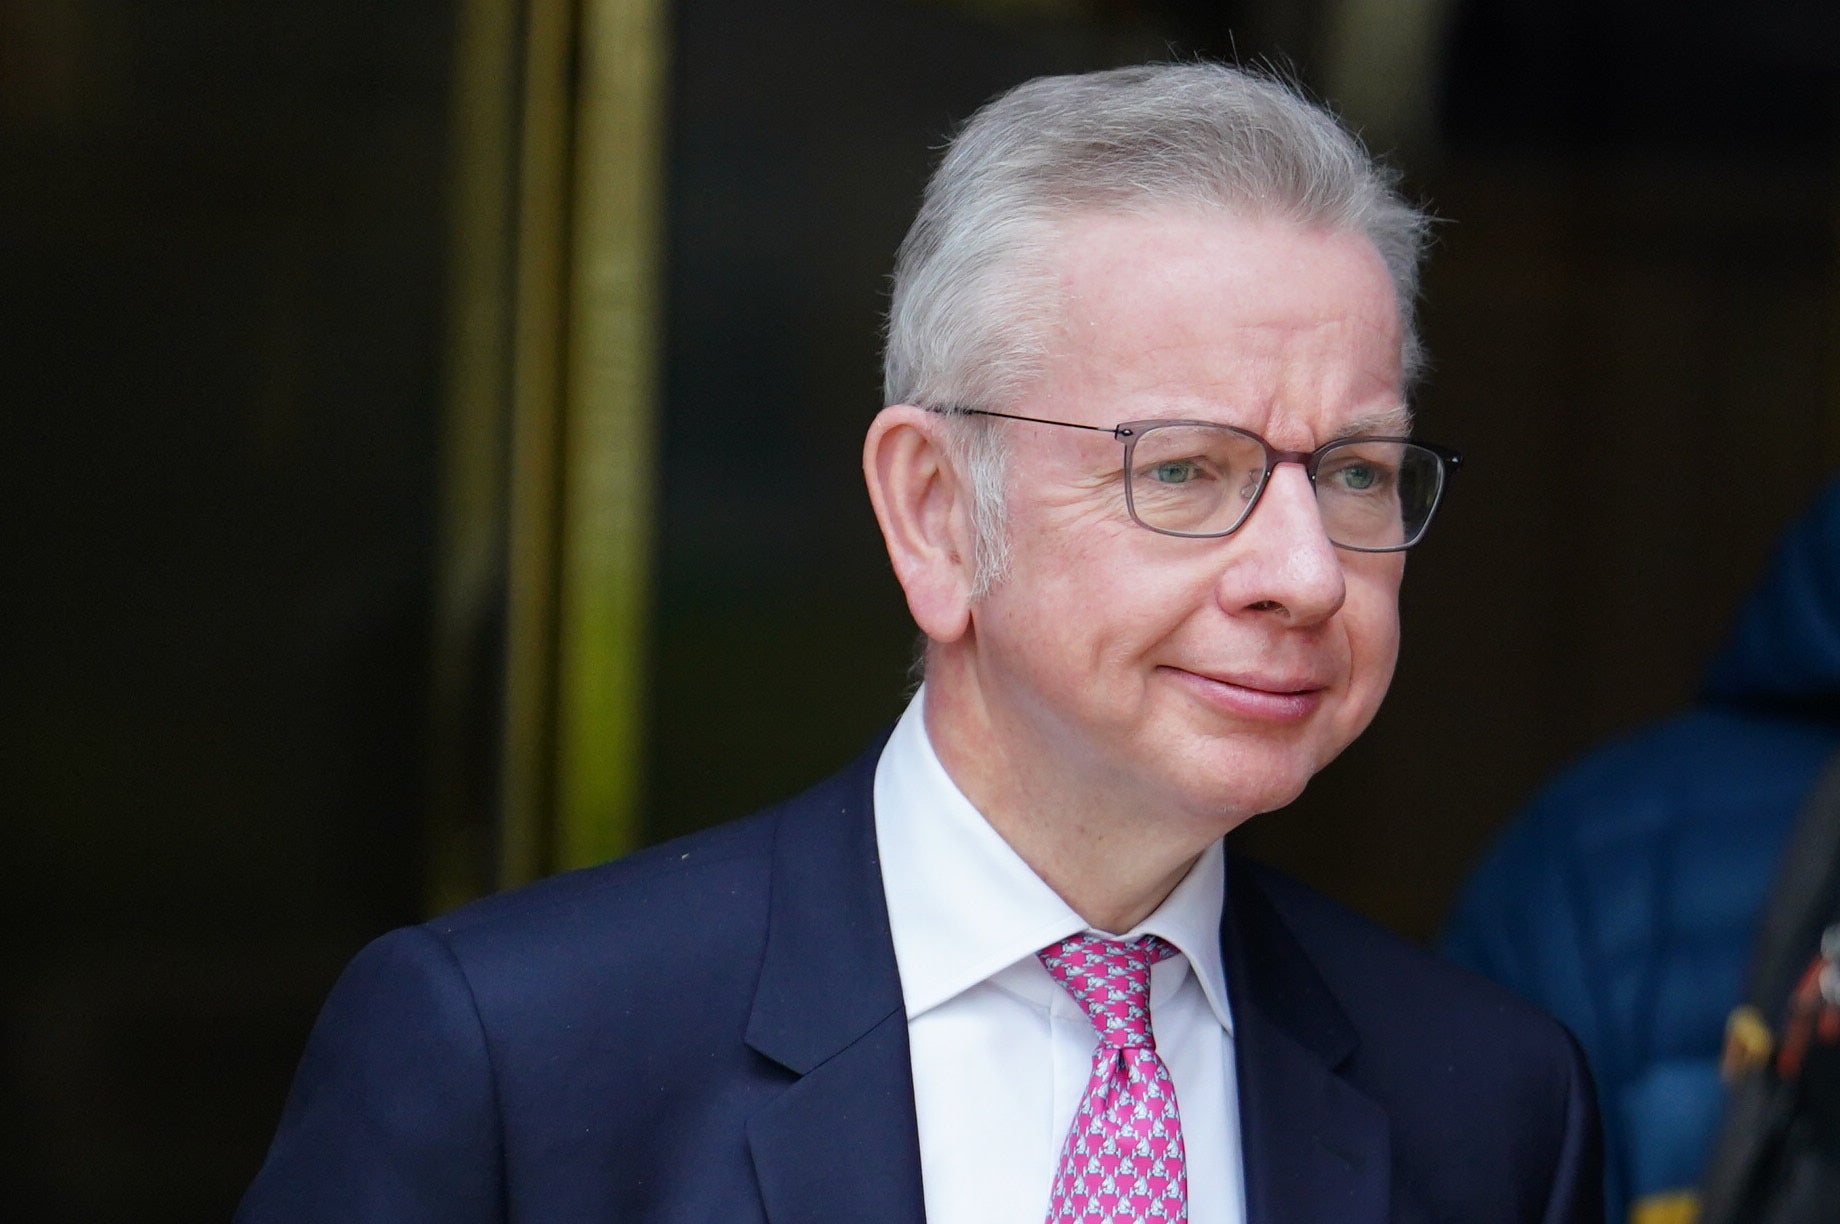 Announcing the government's new definition of extremism, Michael Gove confirmed ‘From the river to the sea’ – the controversial chant used on pro-Palestinian marches – was acceptable, as it is open to different interpretations